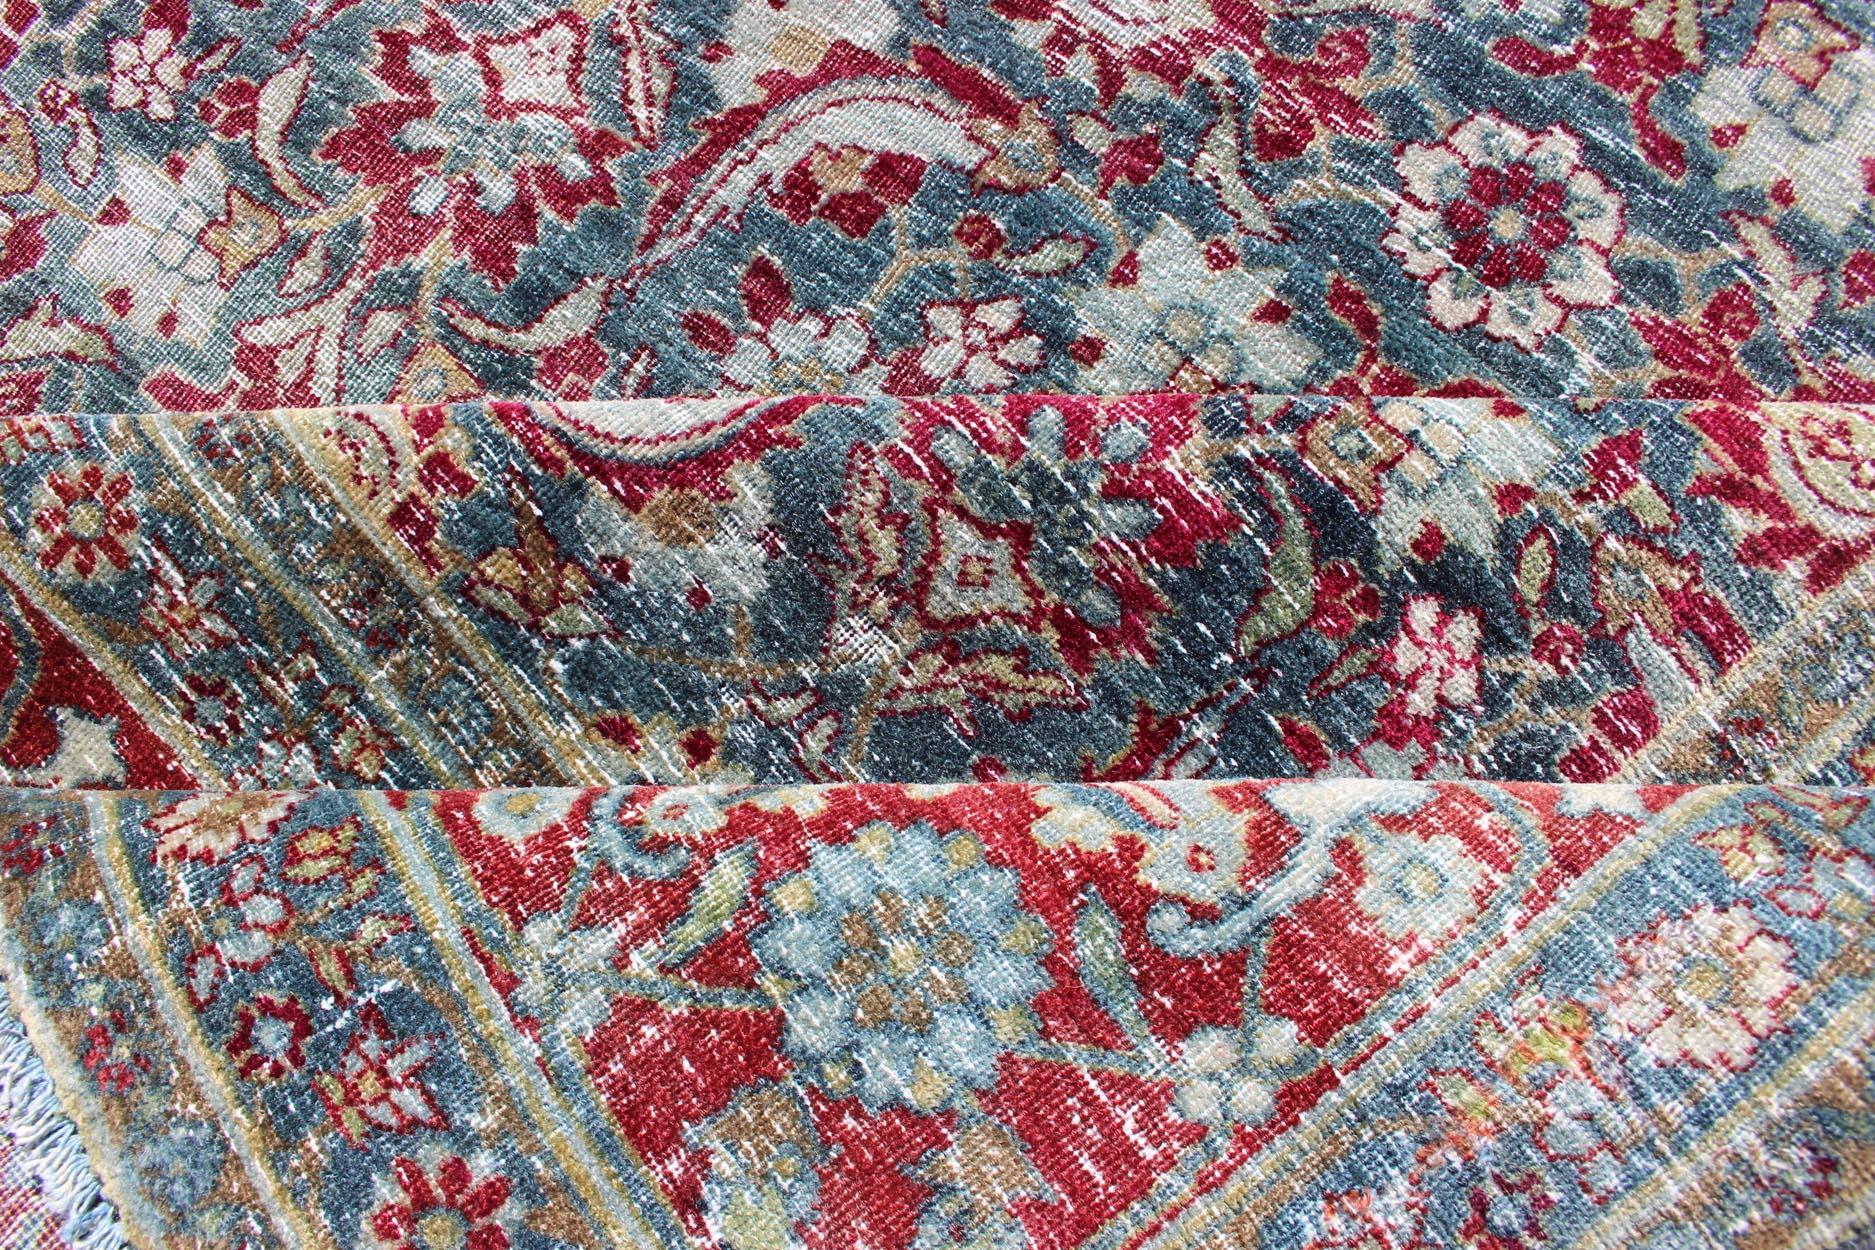 Antique Persian Yazd Rug with Floral-Geometric Design in Red and Blue In Excellent Condition For Sale In Atlanta, GA